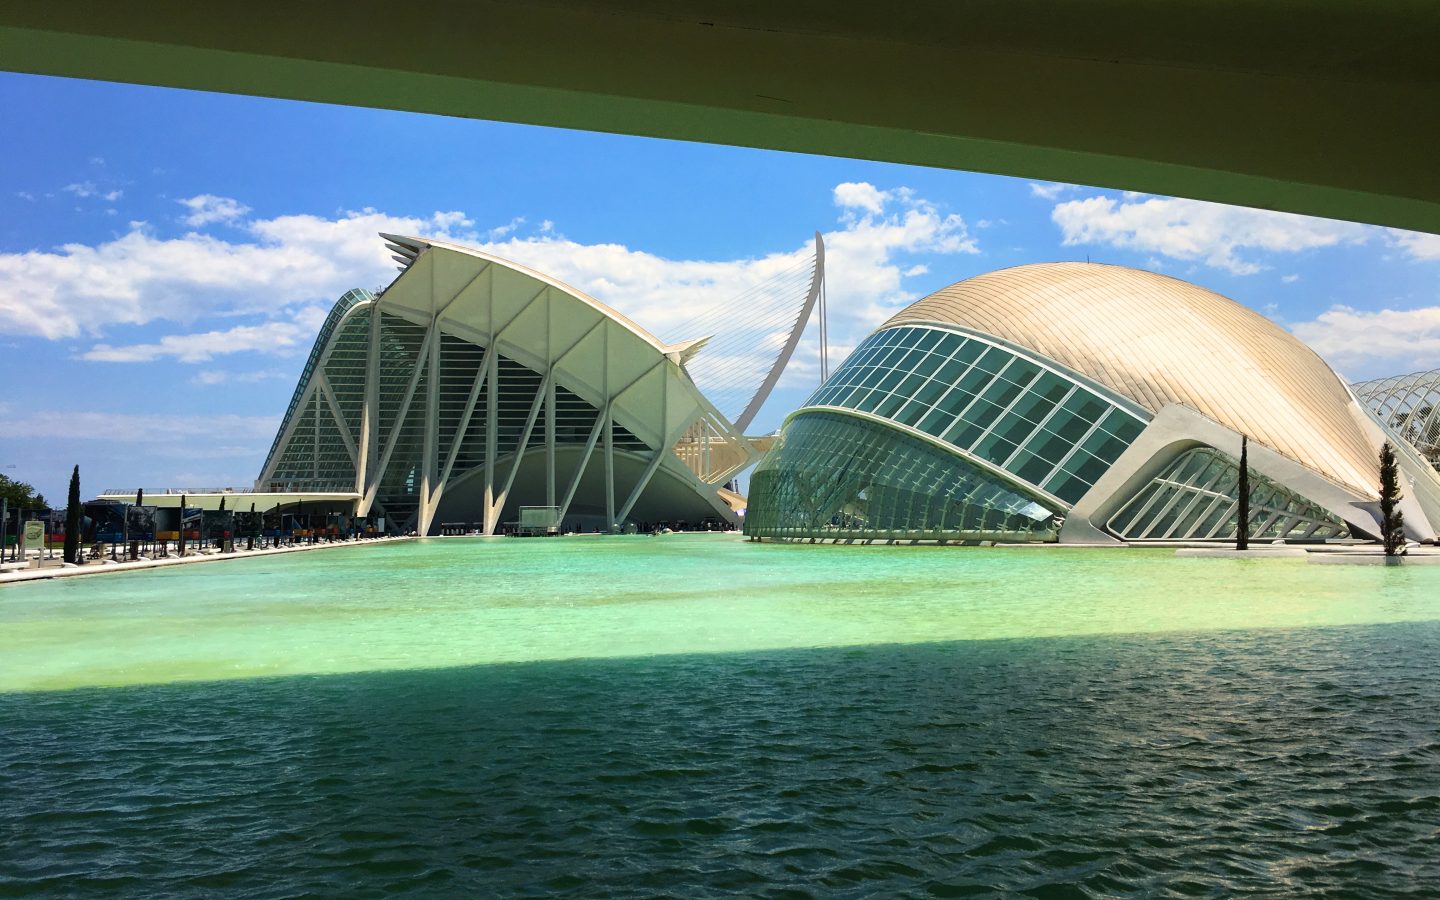 Valencia: the Best of Both Worlds